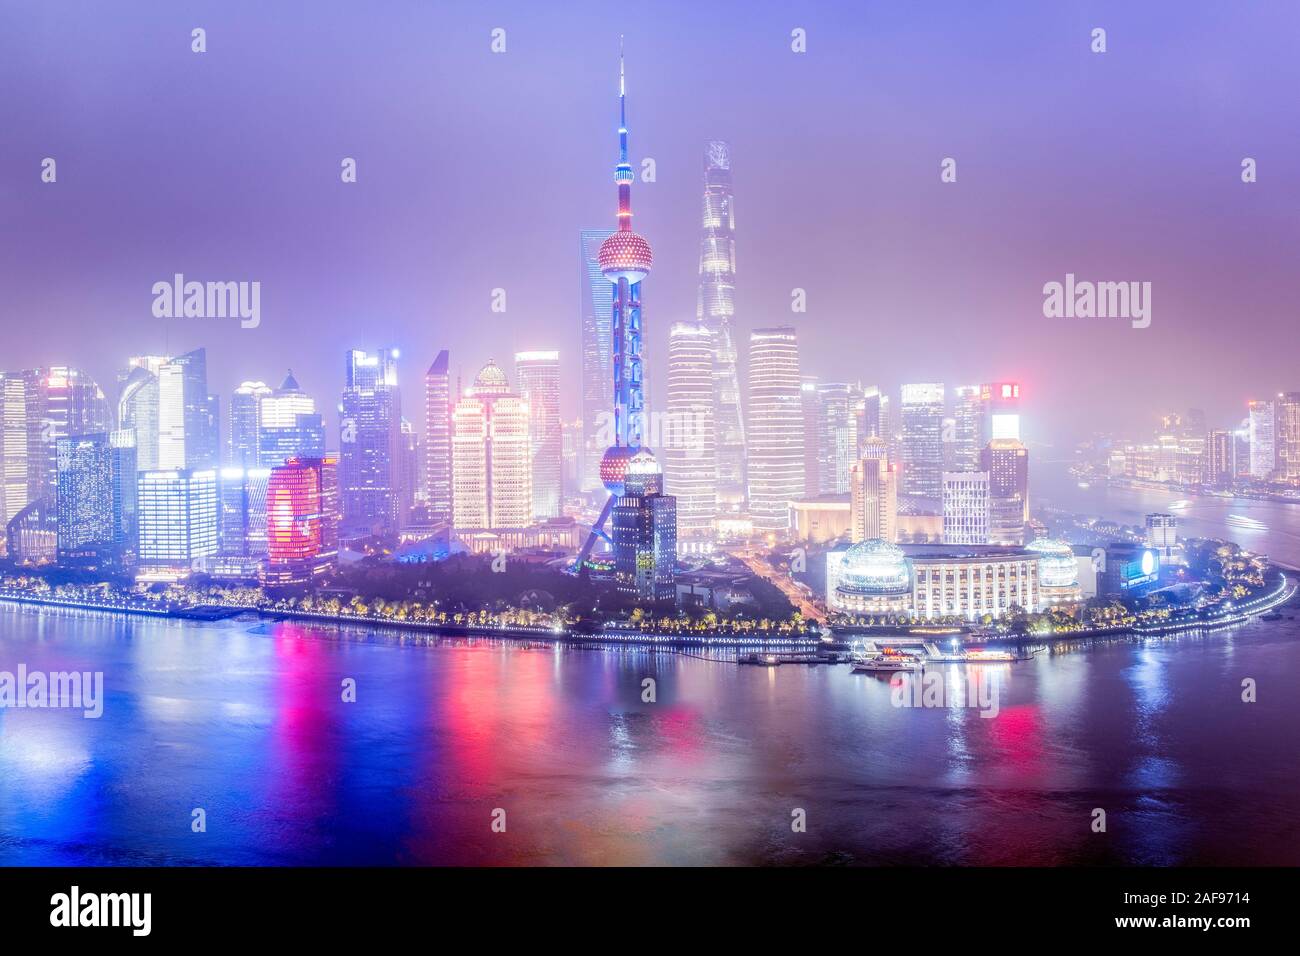 Pudong district and the skyline of Shanghai, China with the Huangpu river and tall skyscrapers Stock Photo